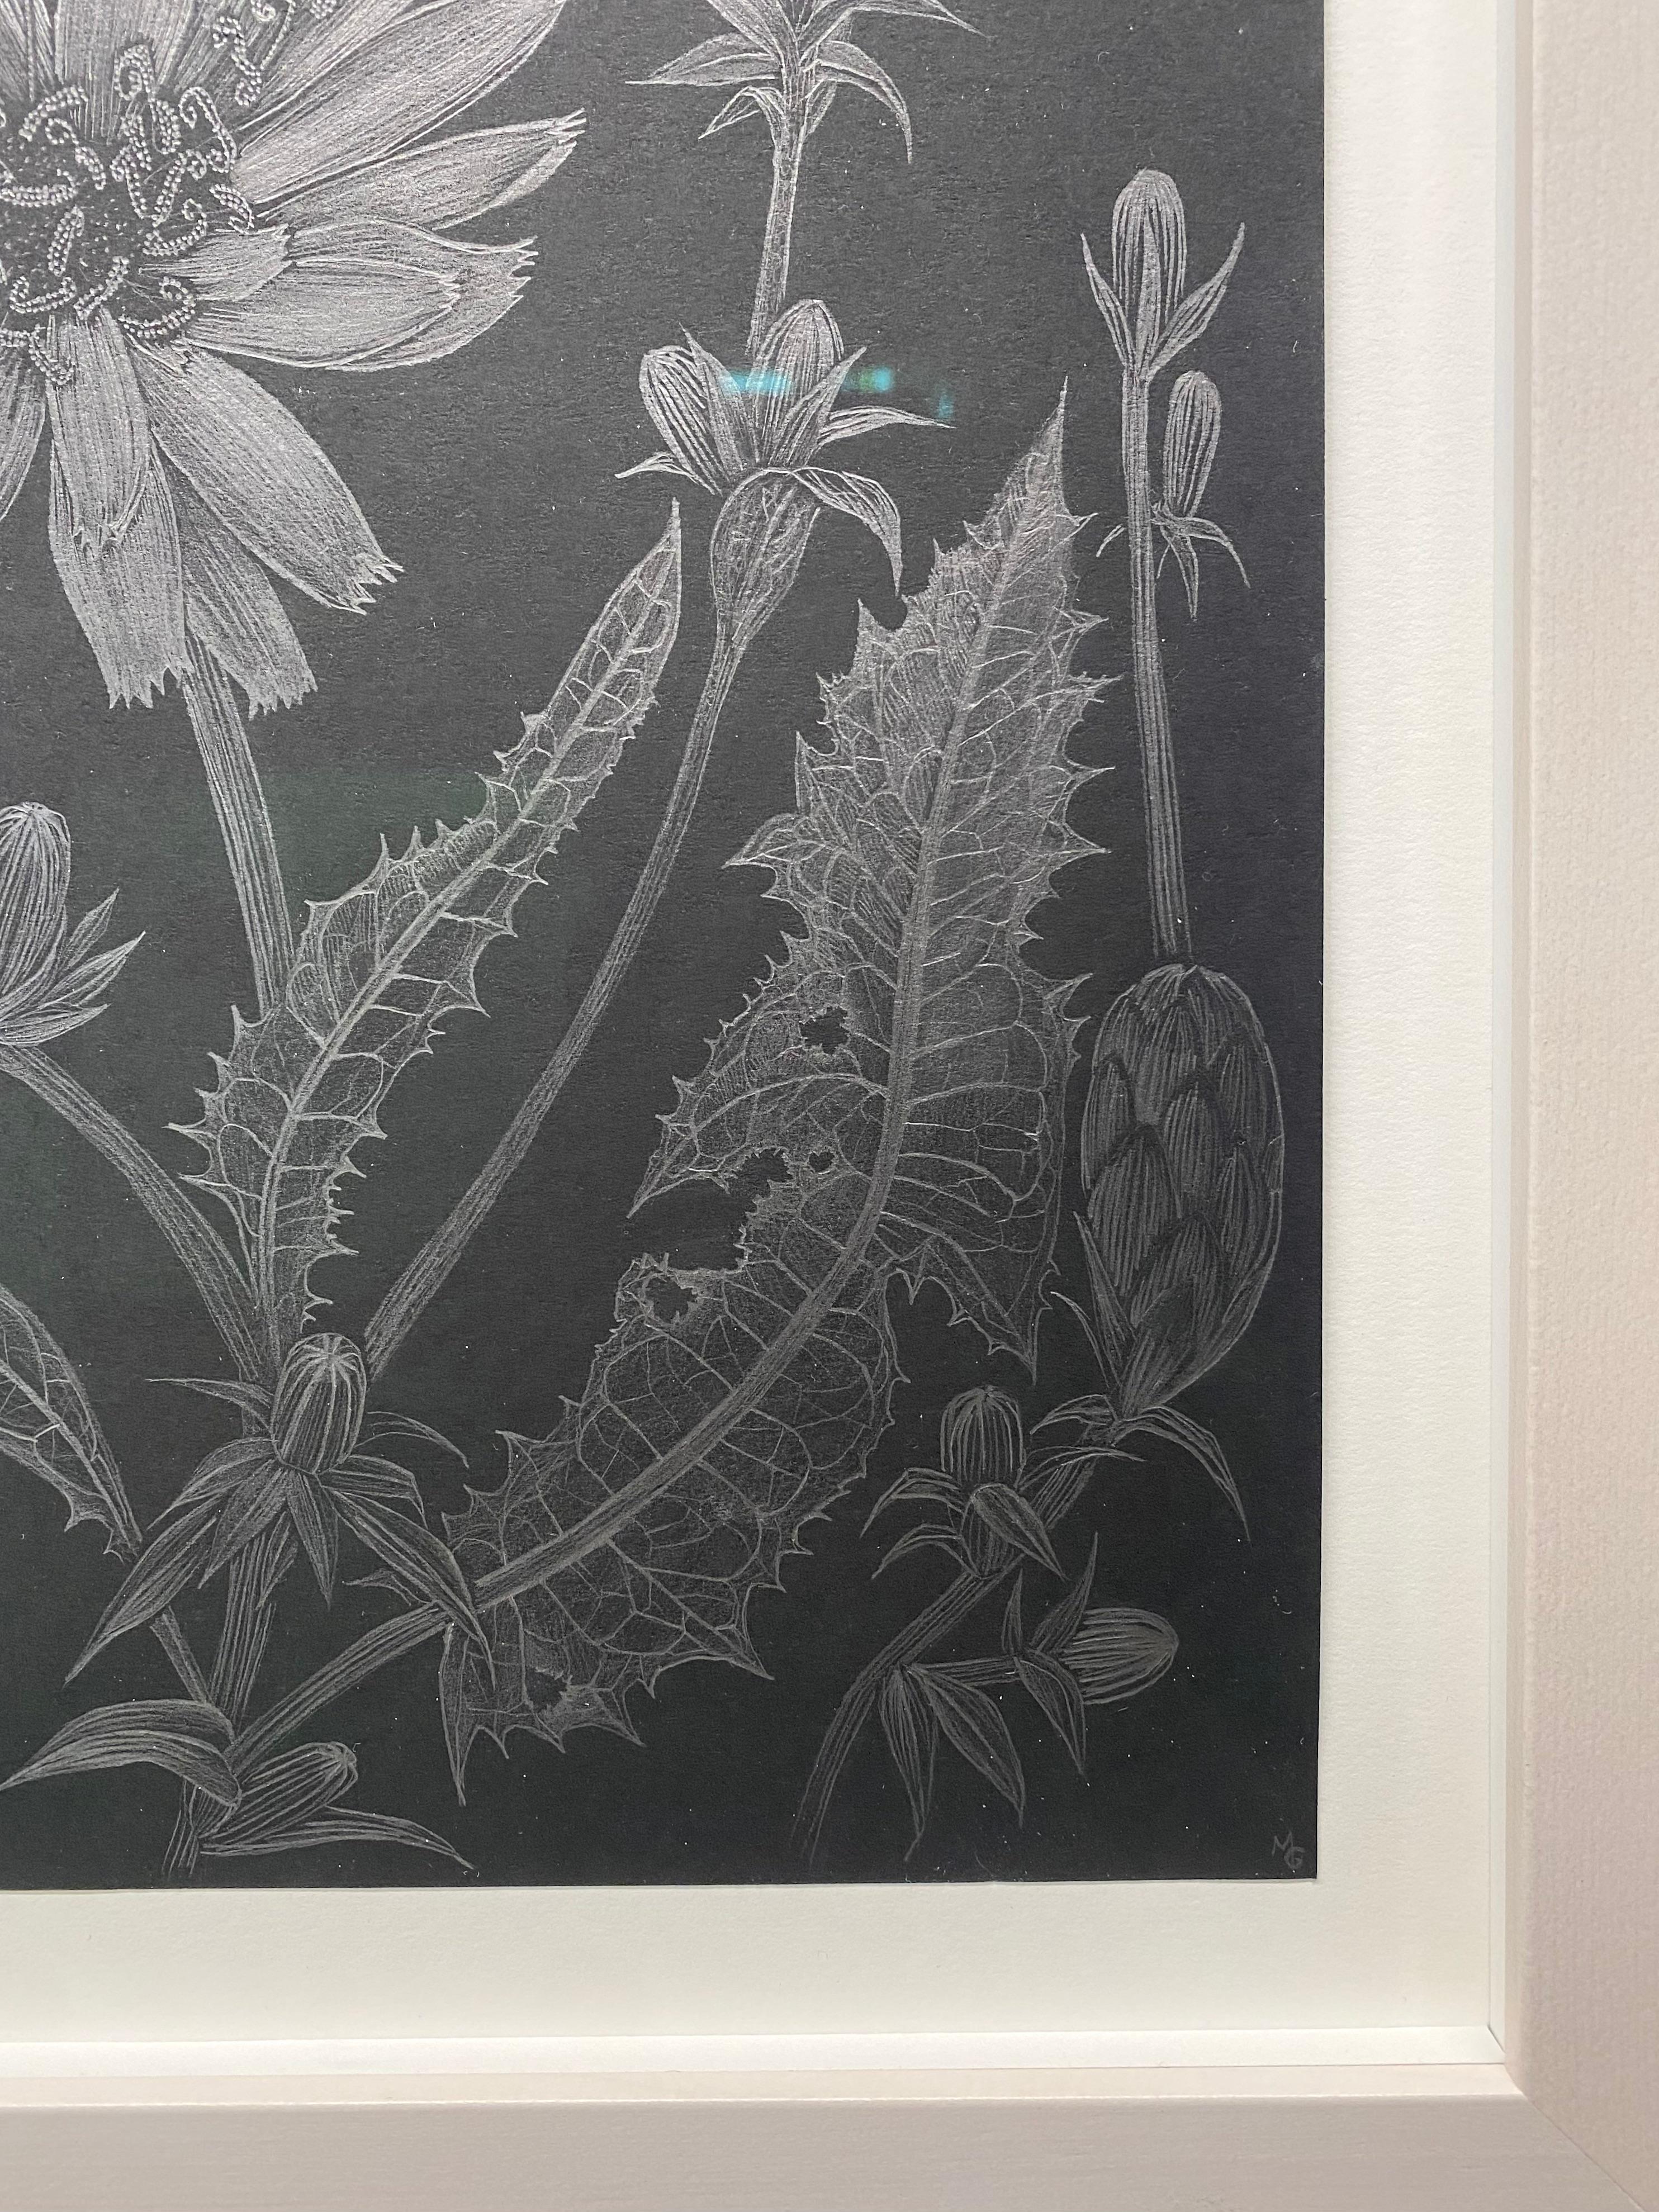 This delicate silver botanical drawing is made with graphite on painted black paper. The exploration of ephemerality, and the fragility of the perennial chicory plant, and the plant's texture and movement, are the focus of this series by Margot